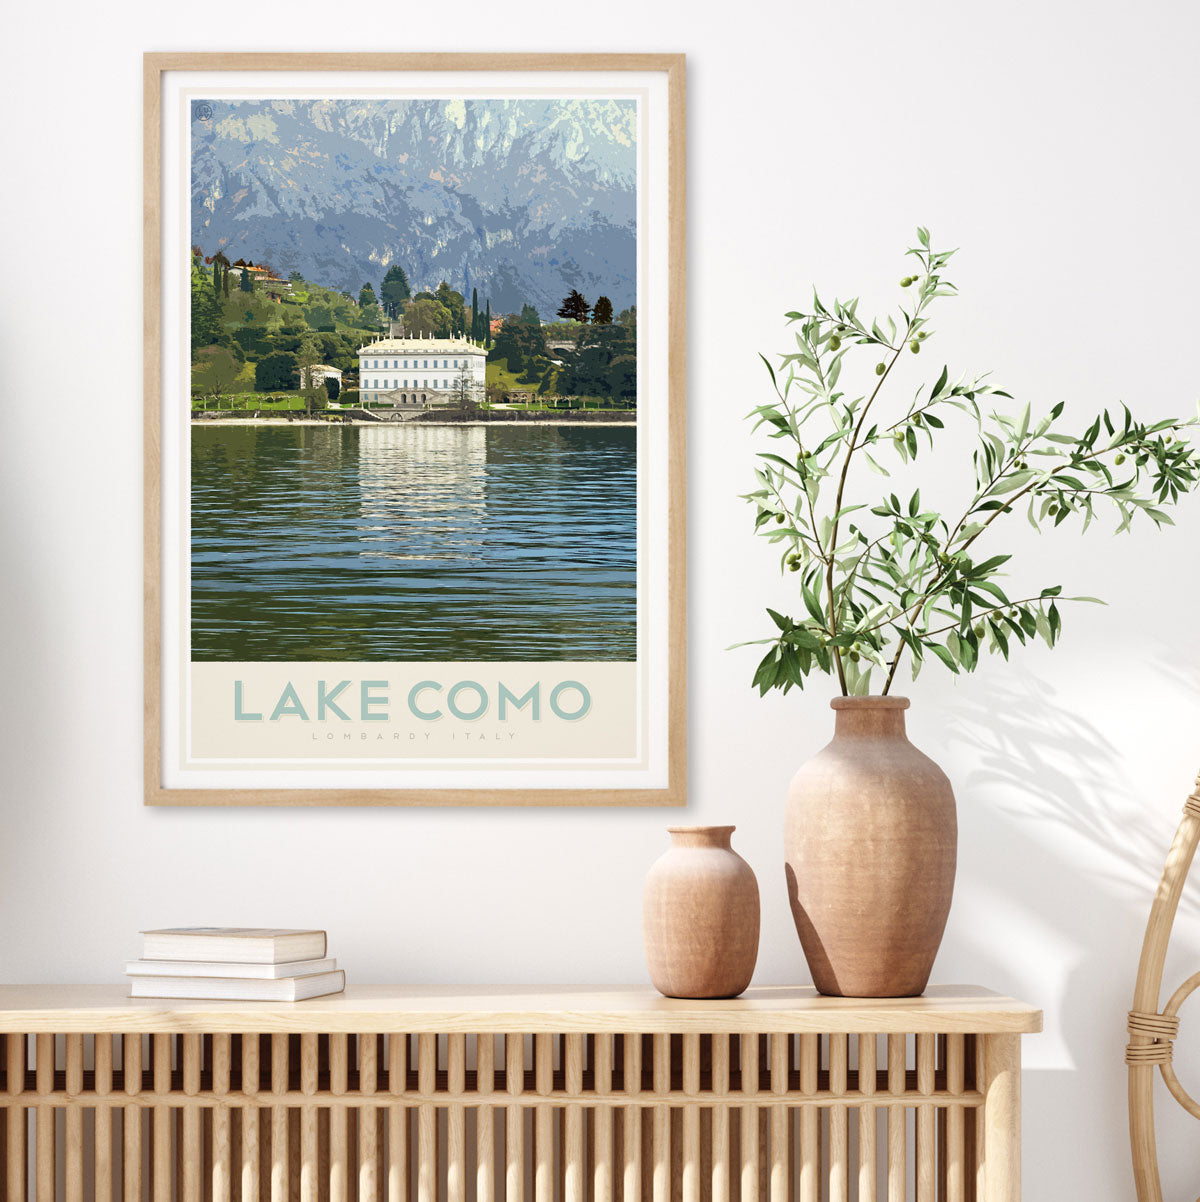 Lake Como Italy, retro travel style print by places we luv